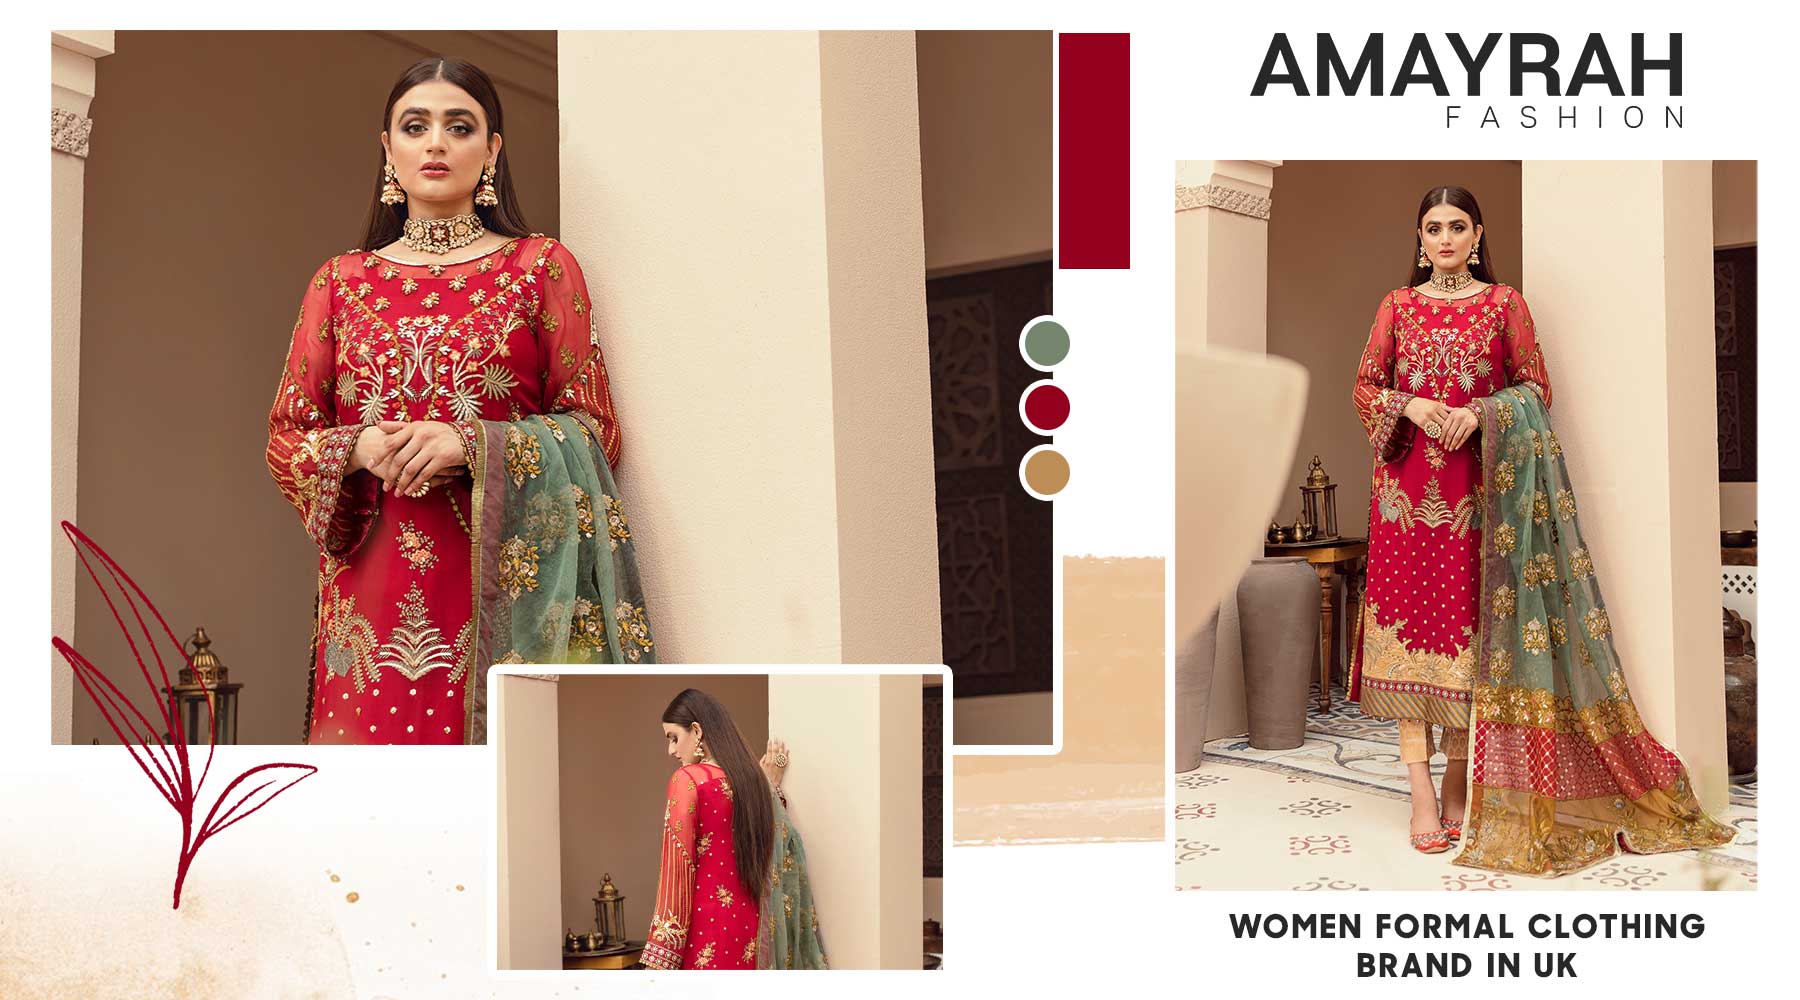 Elevate Your Style: Discover Amayrah Fashion's Women's Formal Clothing Collection